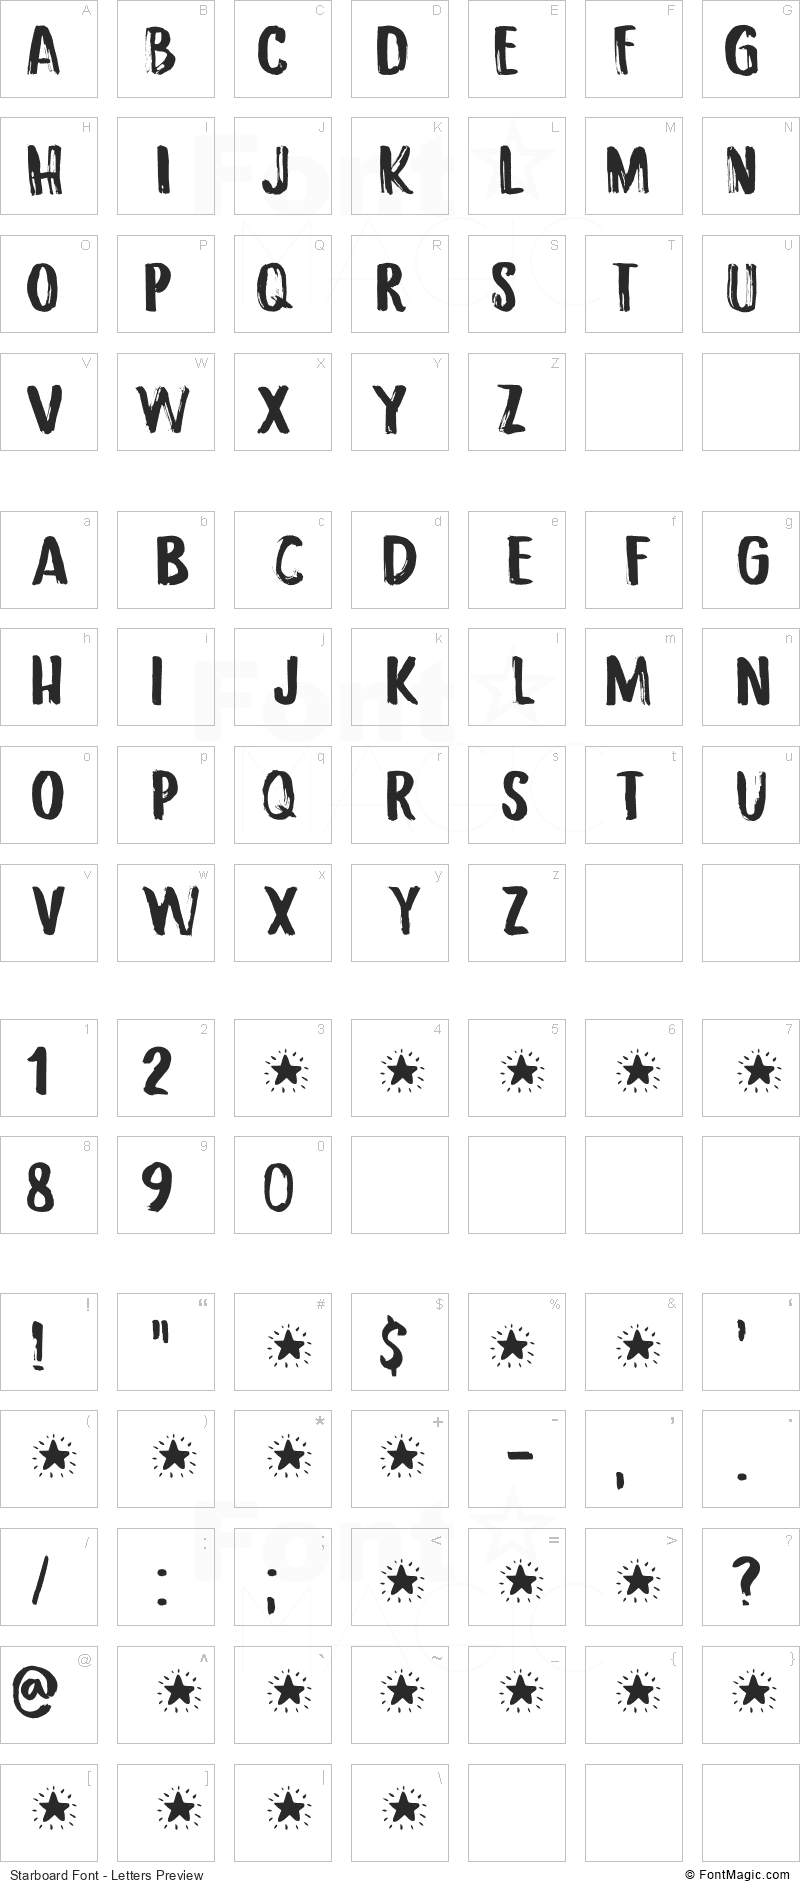 Starboard Font - All Latters Preview Chart